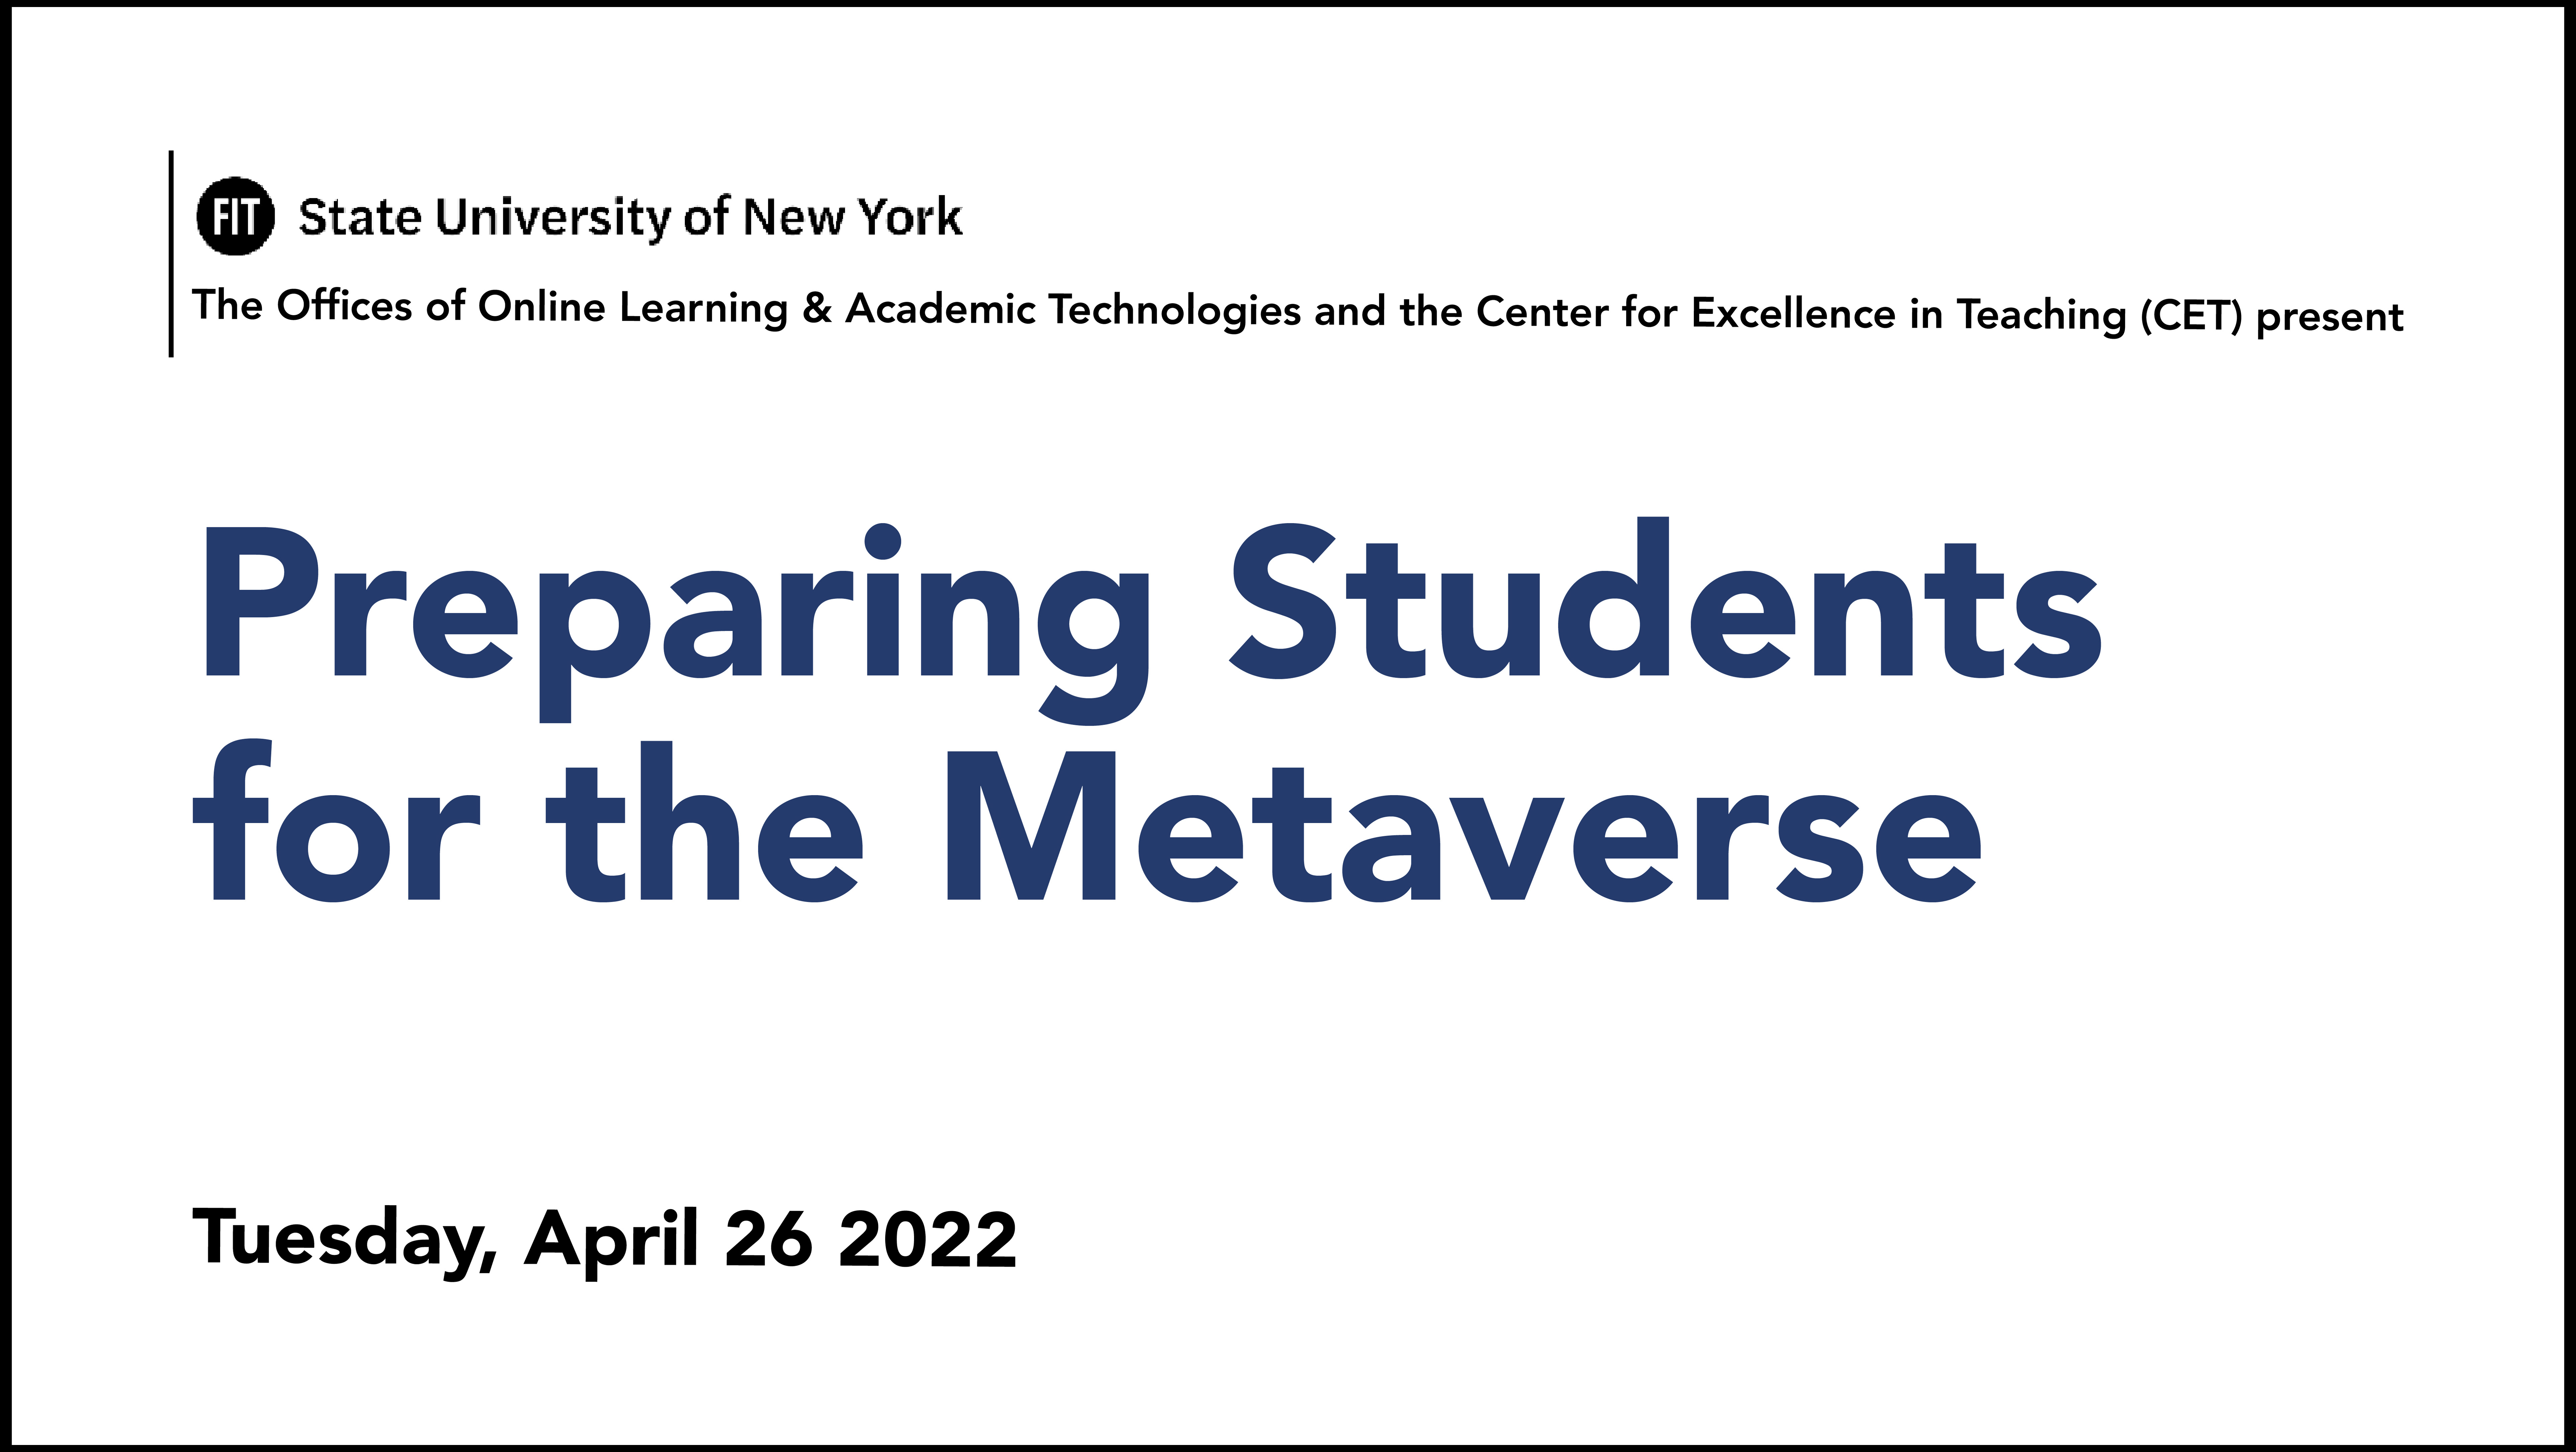 Preparing Students for the Metaverse